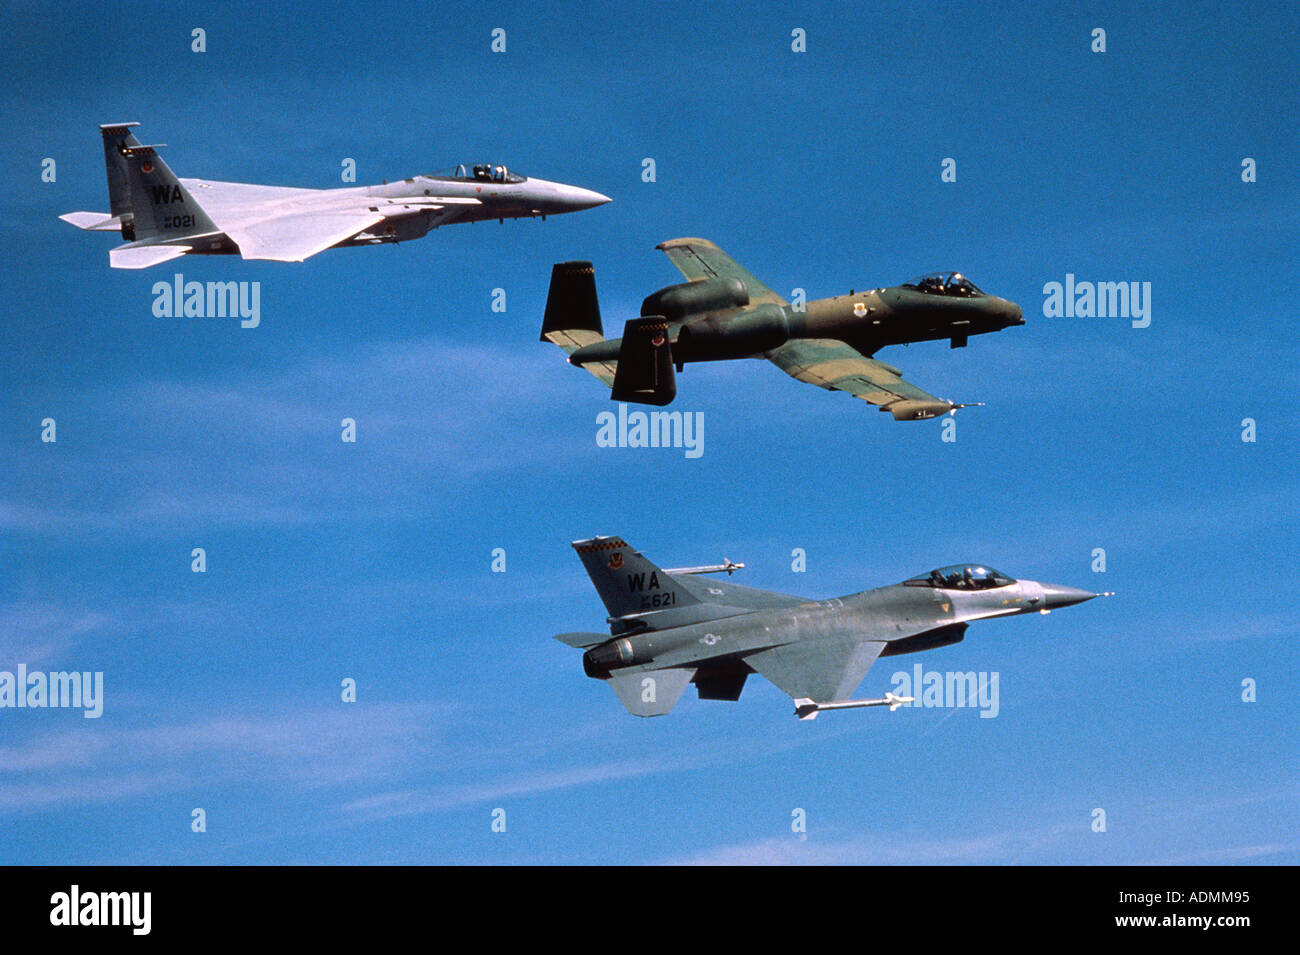 Squadron of three fighter planes flying in formation Stock Photo